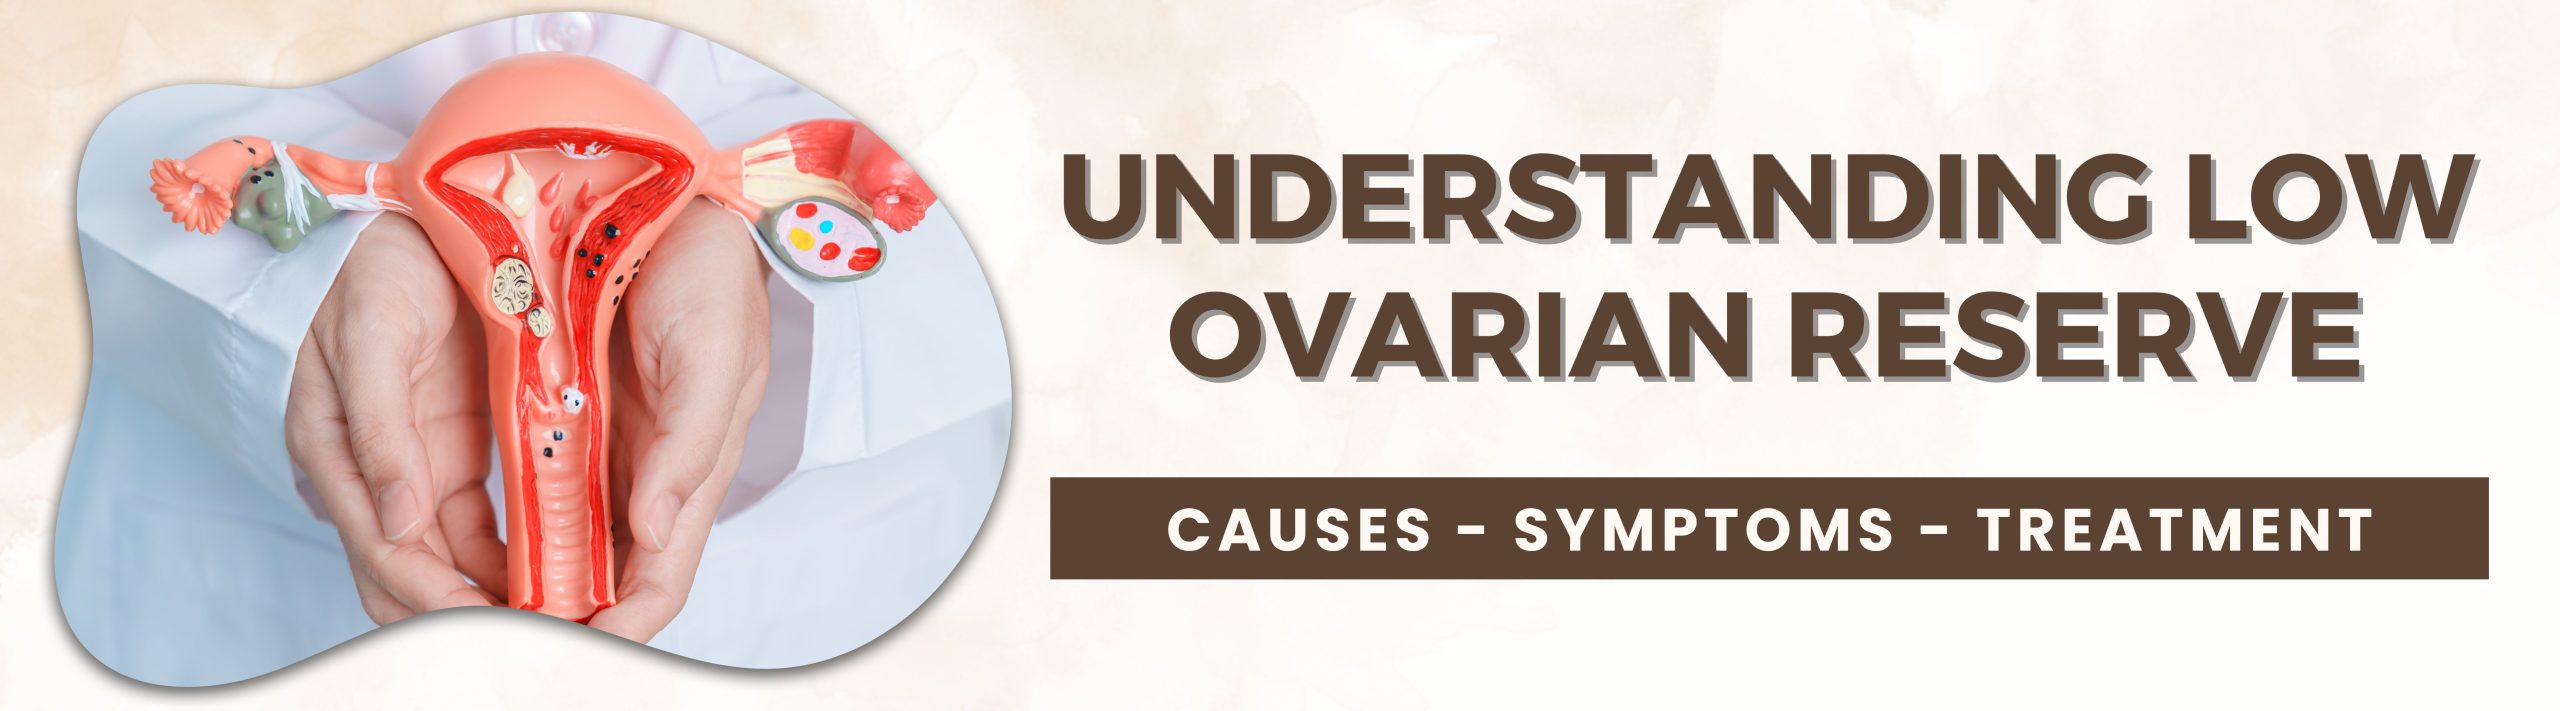 Low Ovarian Reserve